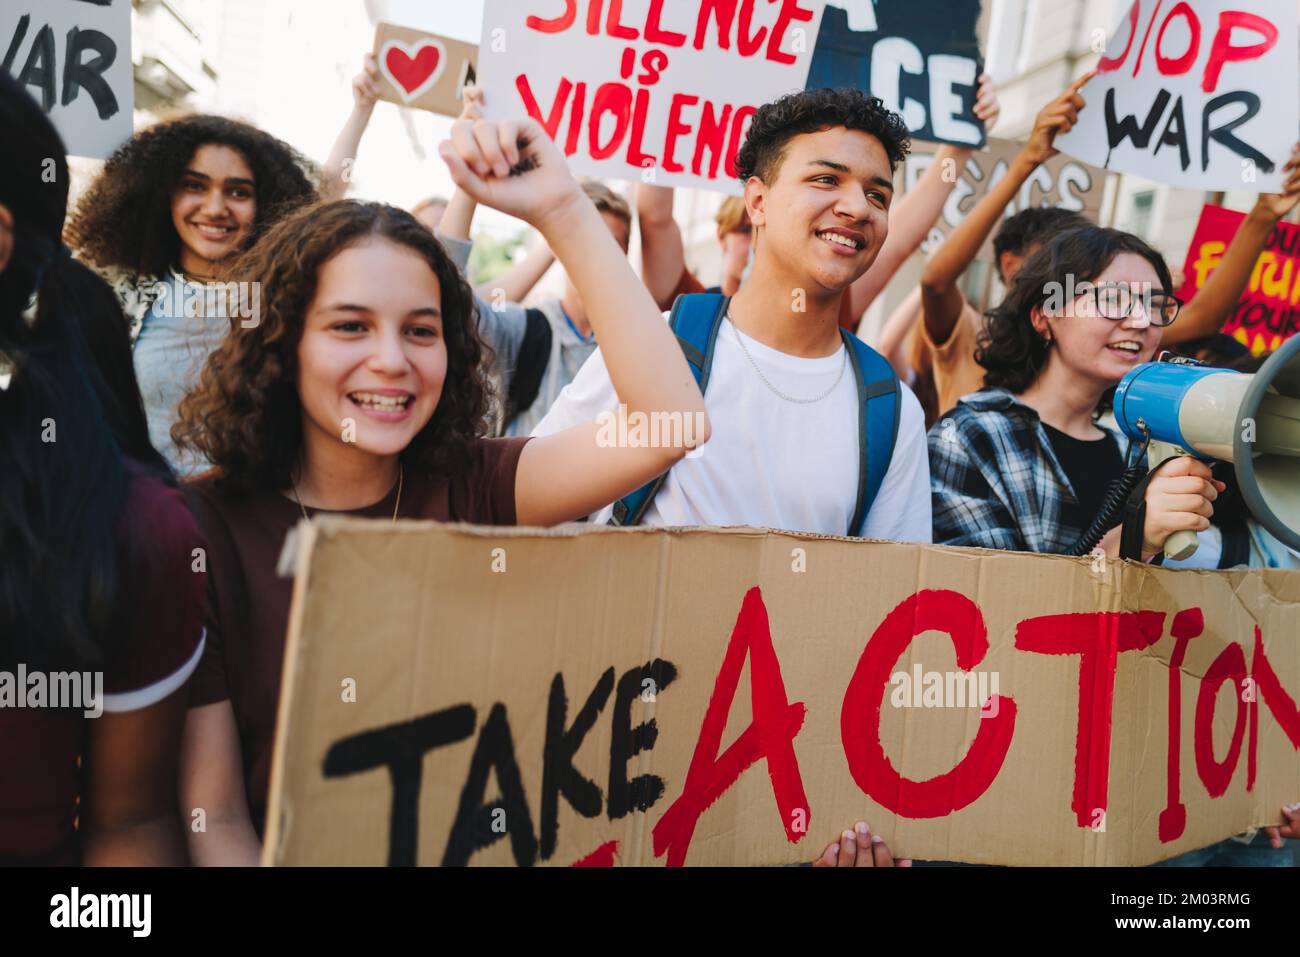 Group of happy youth activists marching for peace and human rights. Multicultural young people protesting against war and violence. Youth demonstrator Stock Photo